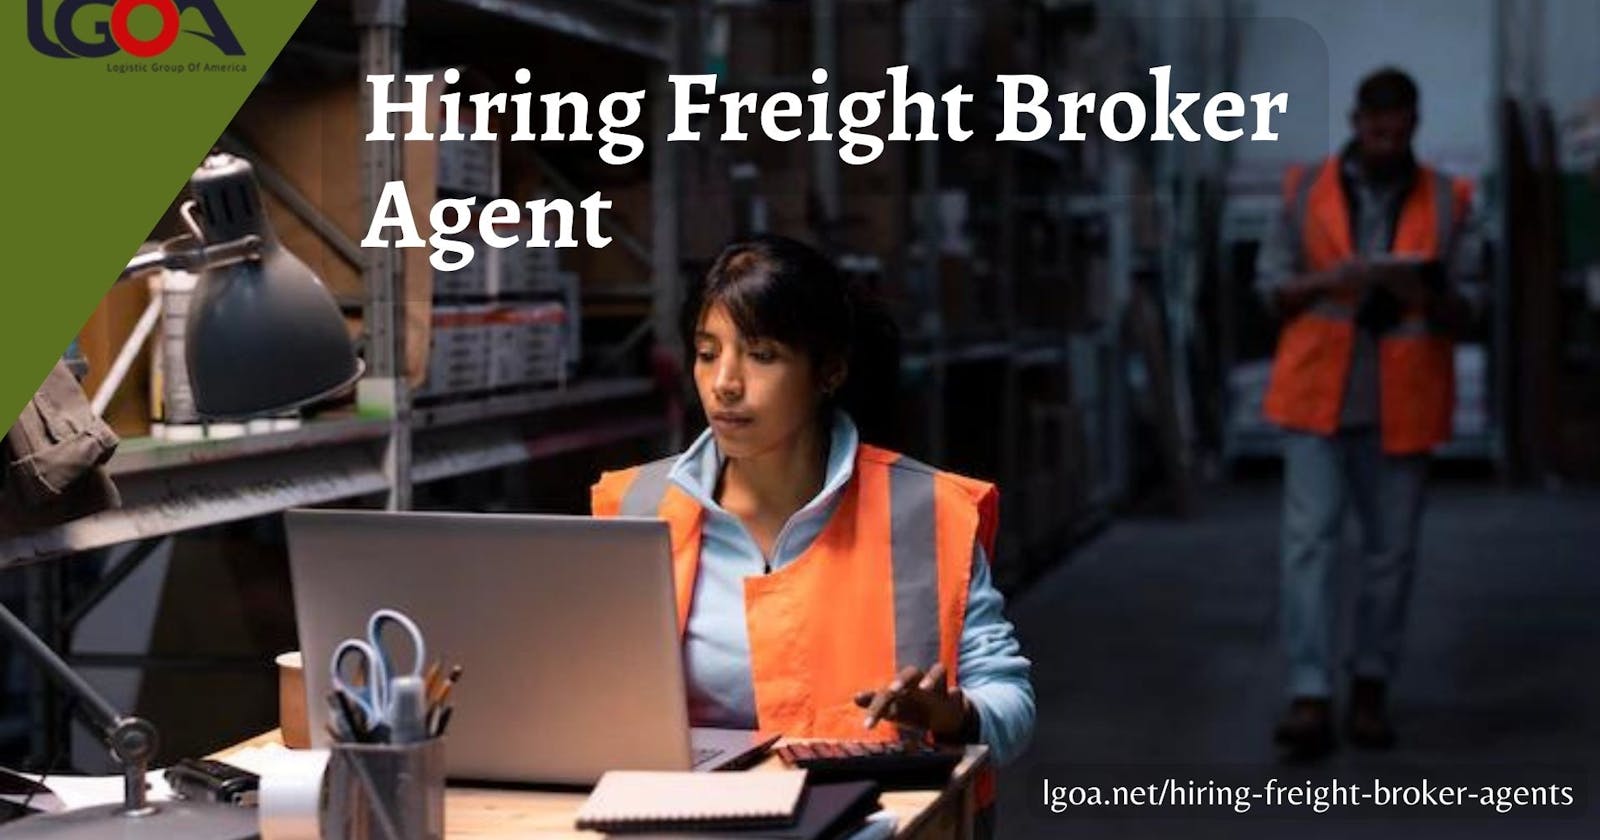 Thinking About Hiring Freight Broker Agents? Read This Then!